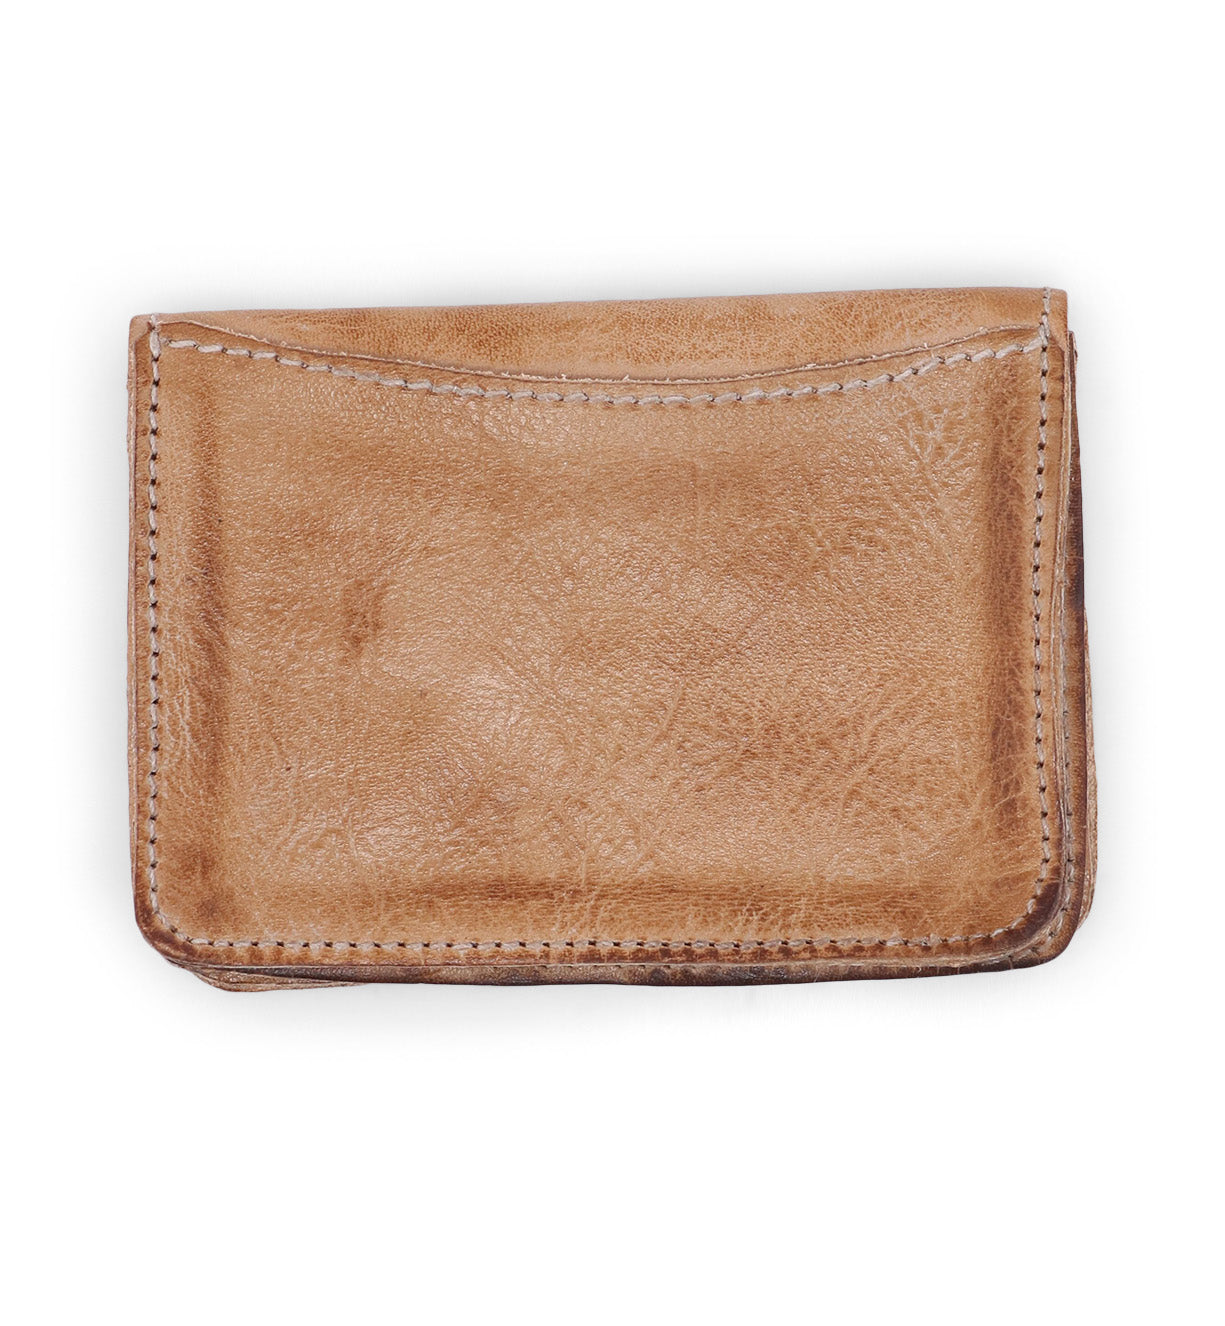 A Jeor leather wallet by Bed Stu on a white background.